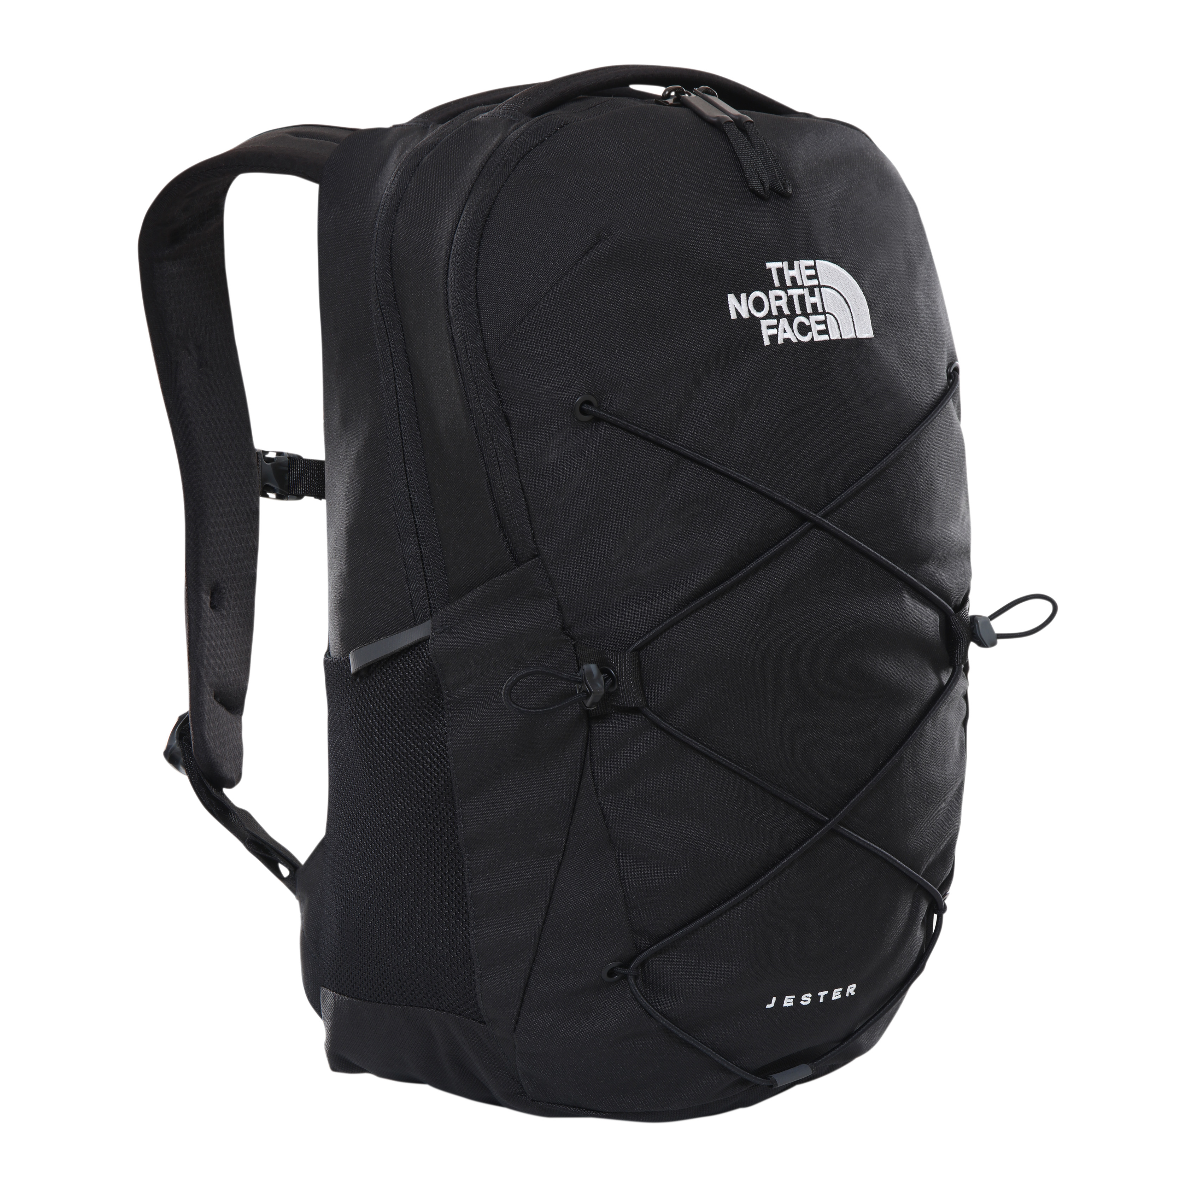 The North Face Jester Backpack | TNF Black